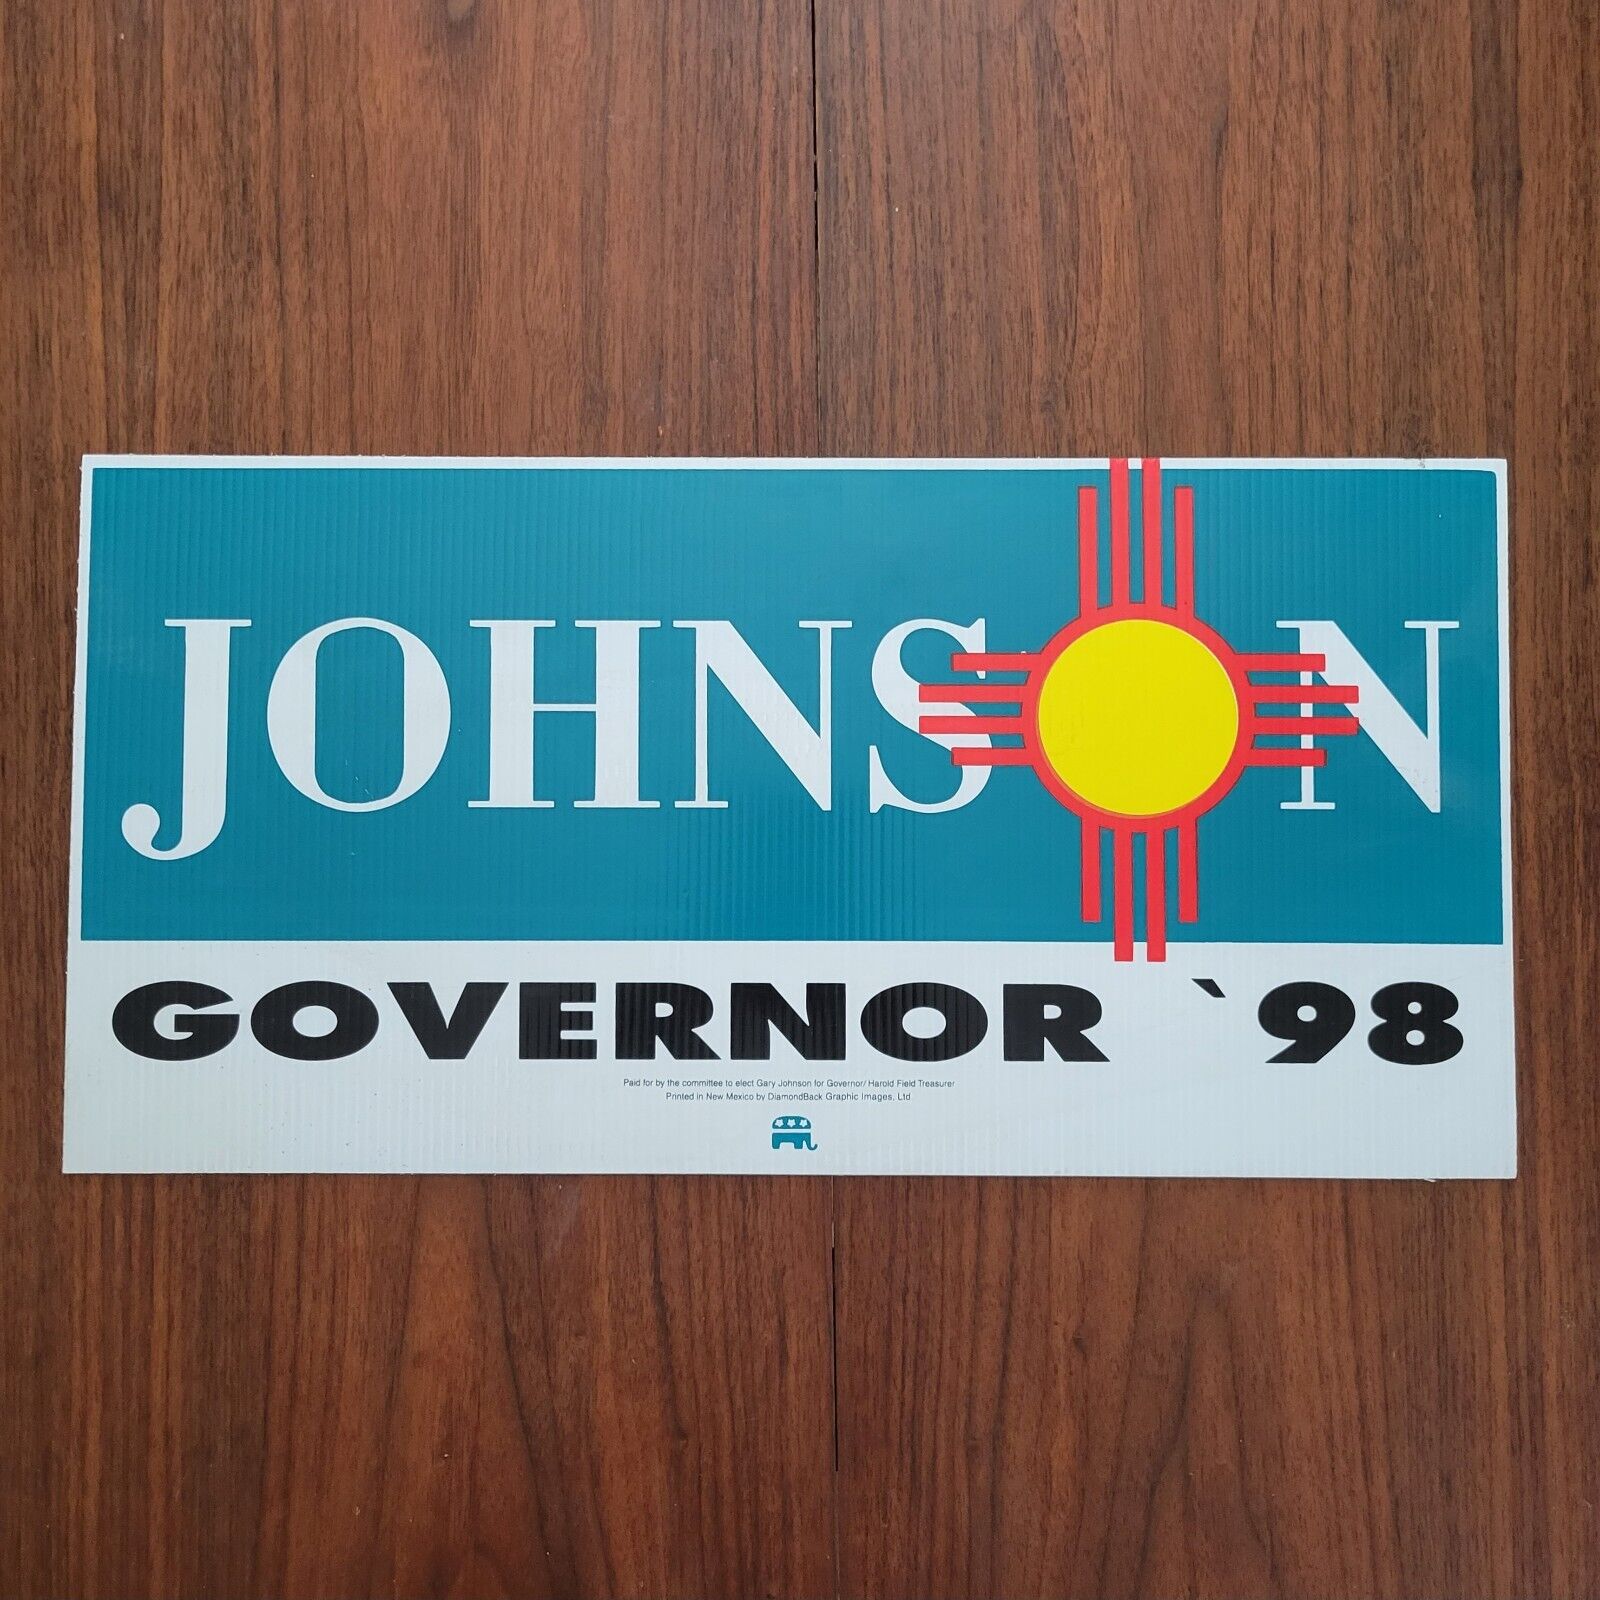 Vintage 1998 Gary Johnson New Mexico Governor Candidate Poster 12